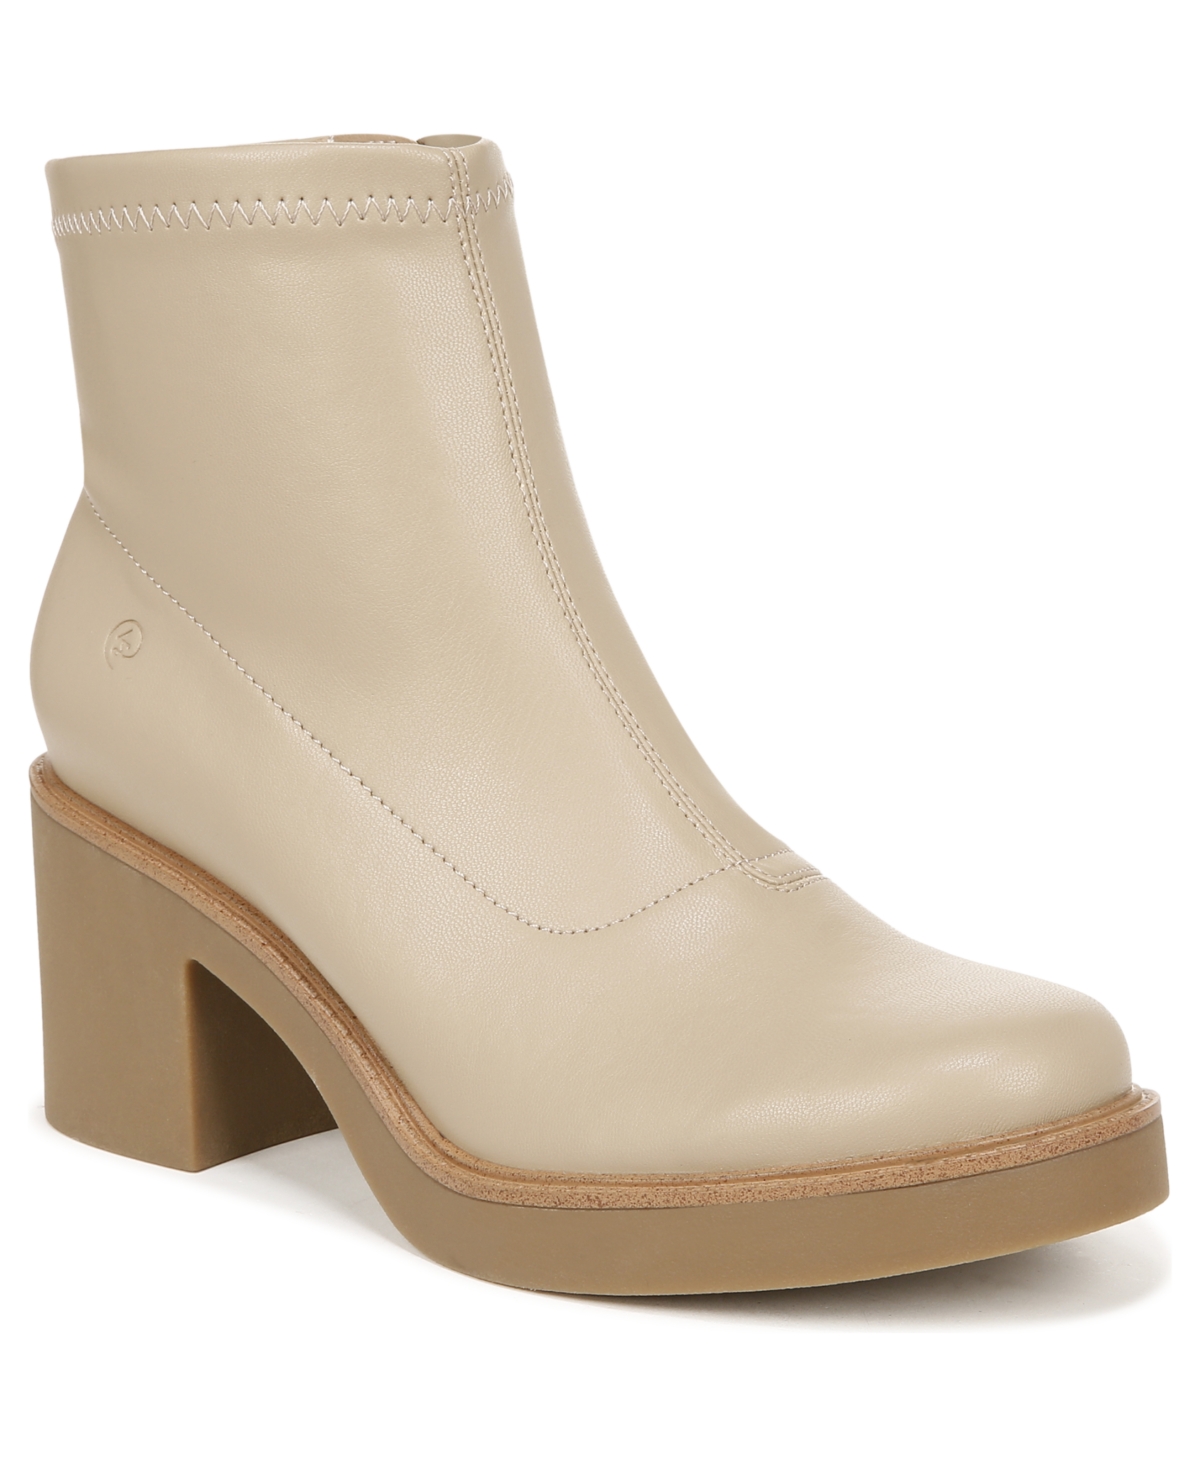 Remix Booties - Beige Faux Leather